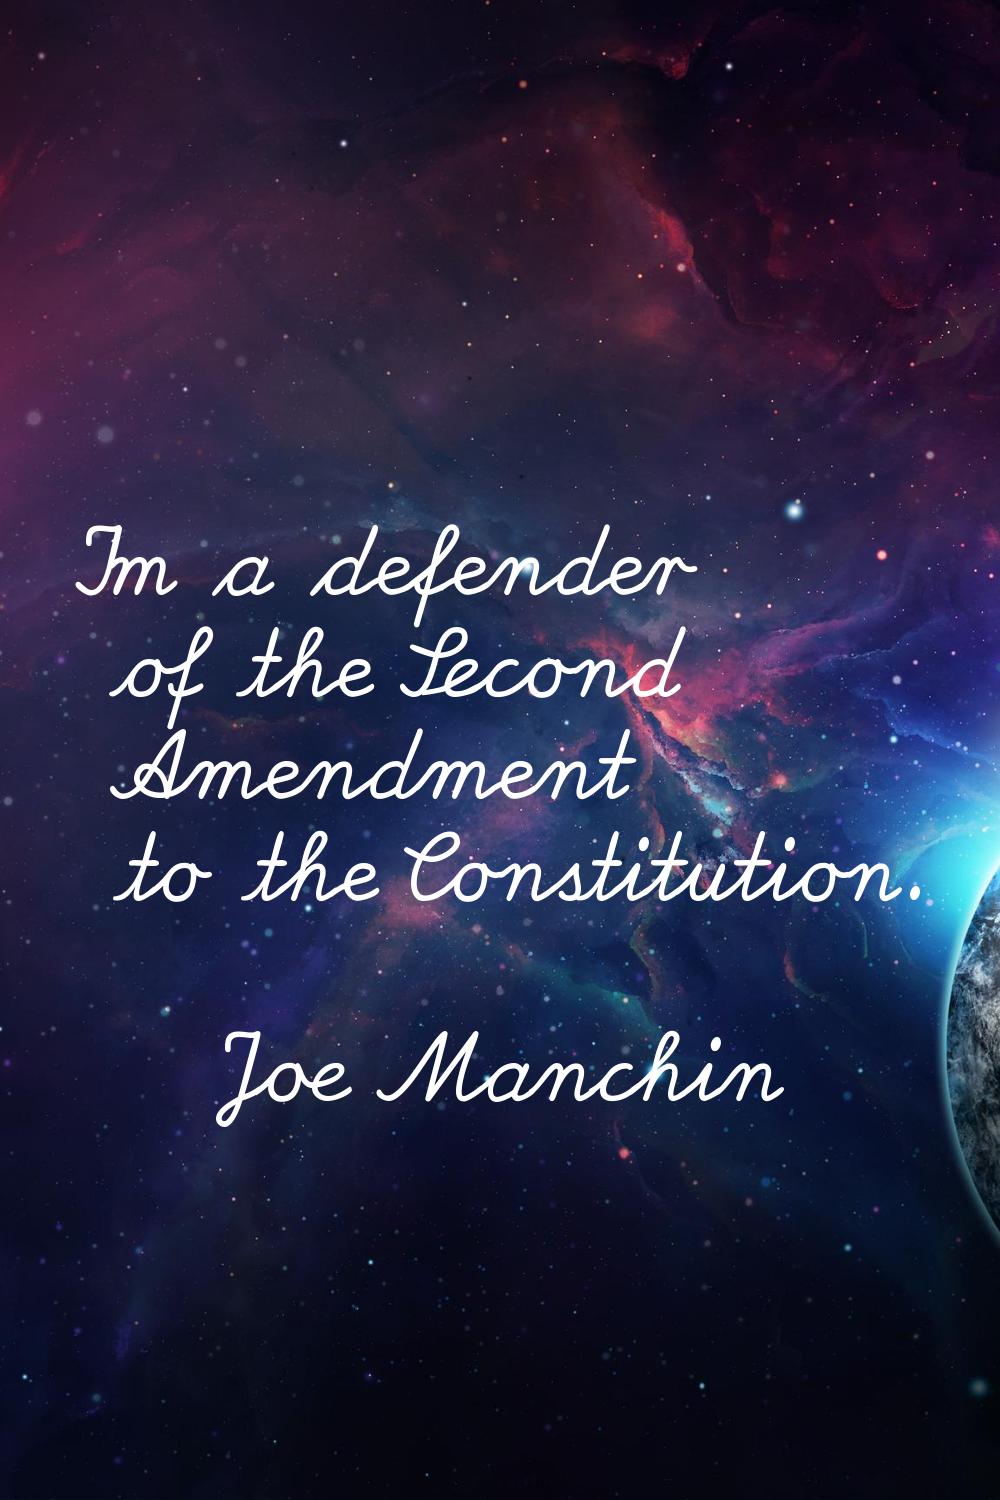 I'm a defender of the Second Amendment to the Constitution.